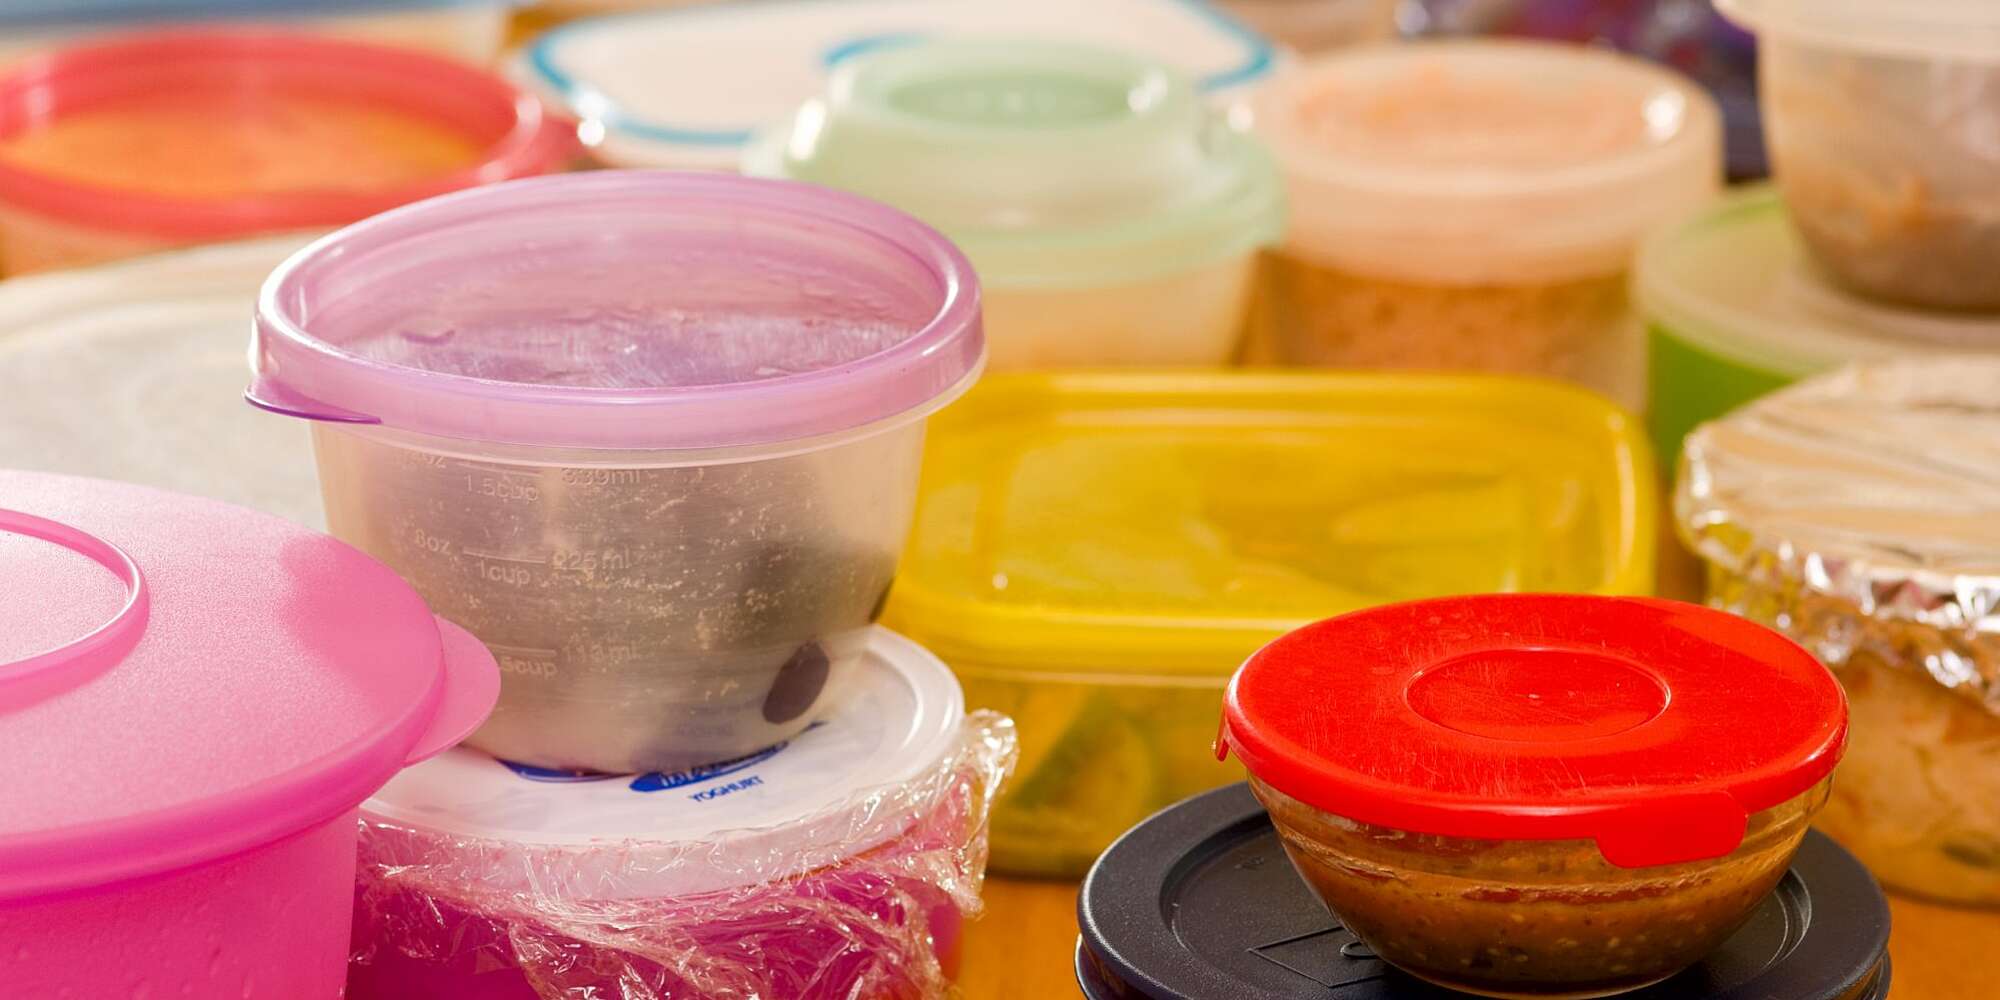 My Choice for Non-Toxic Food Storage Containers